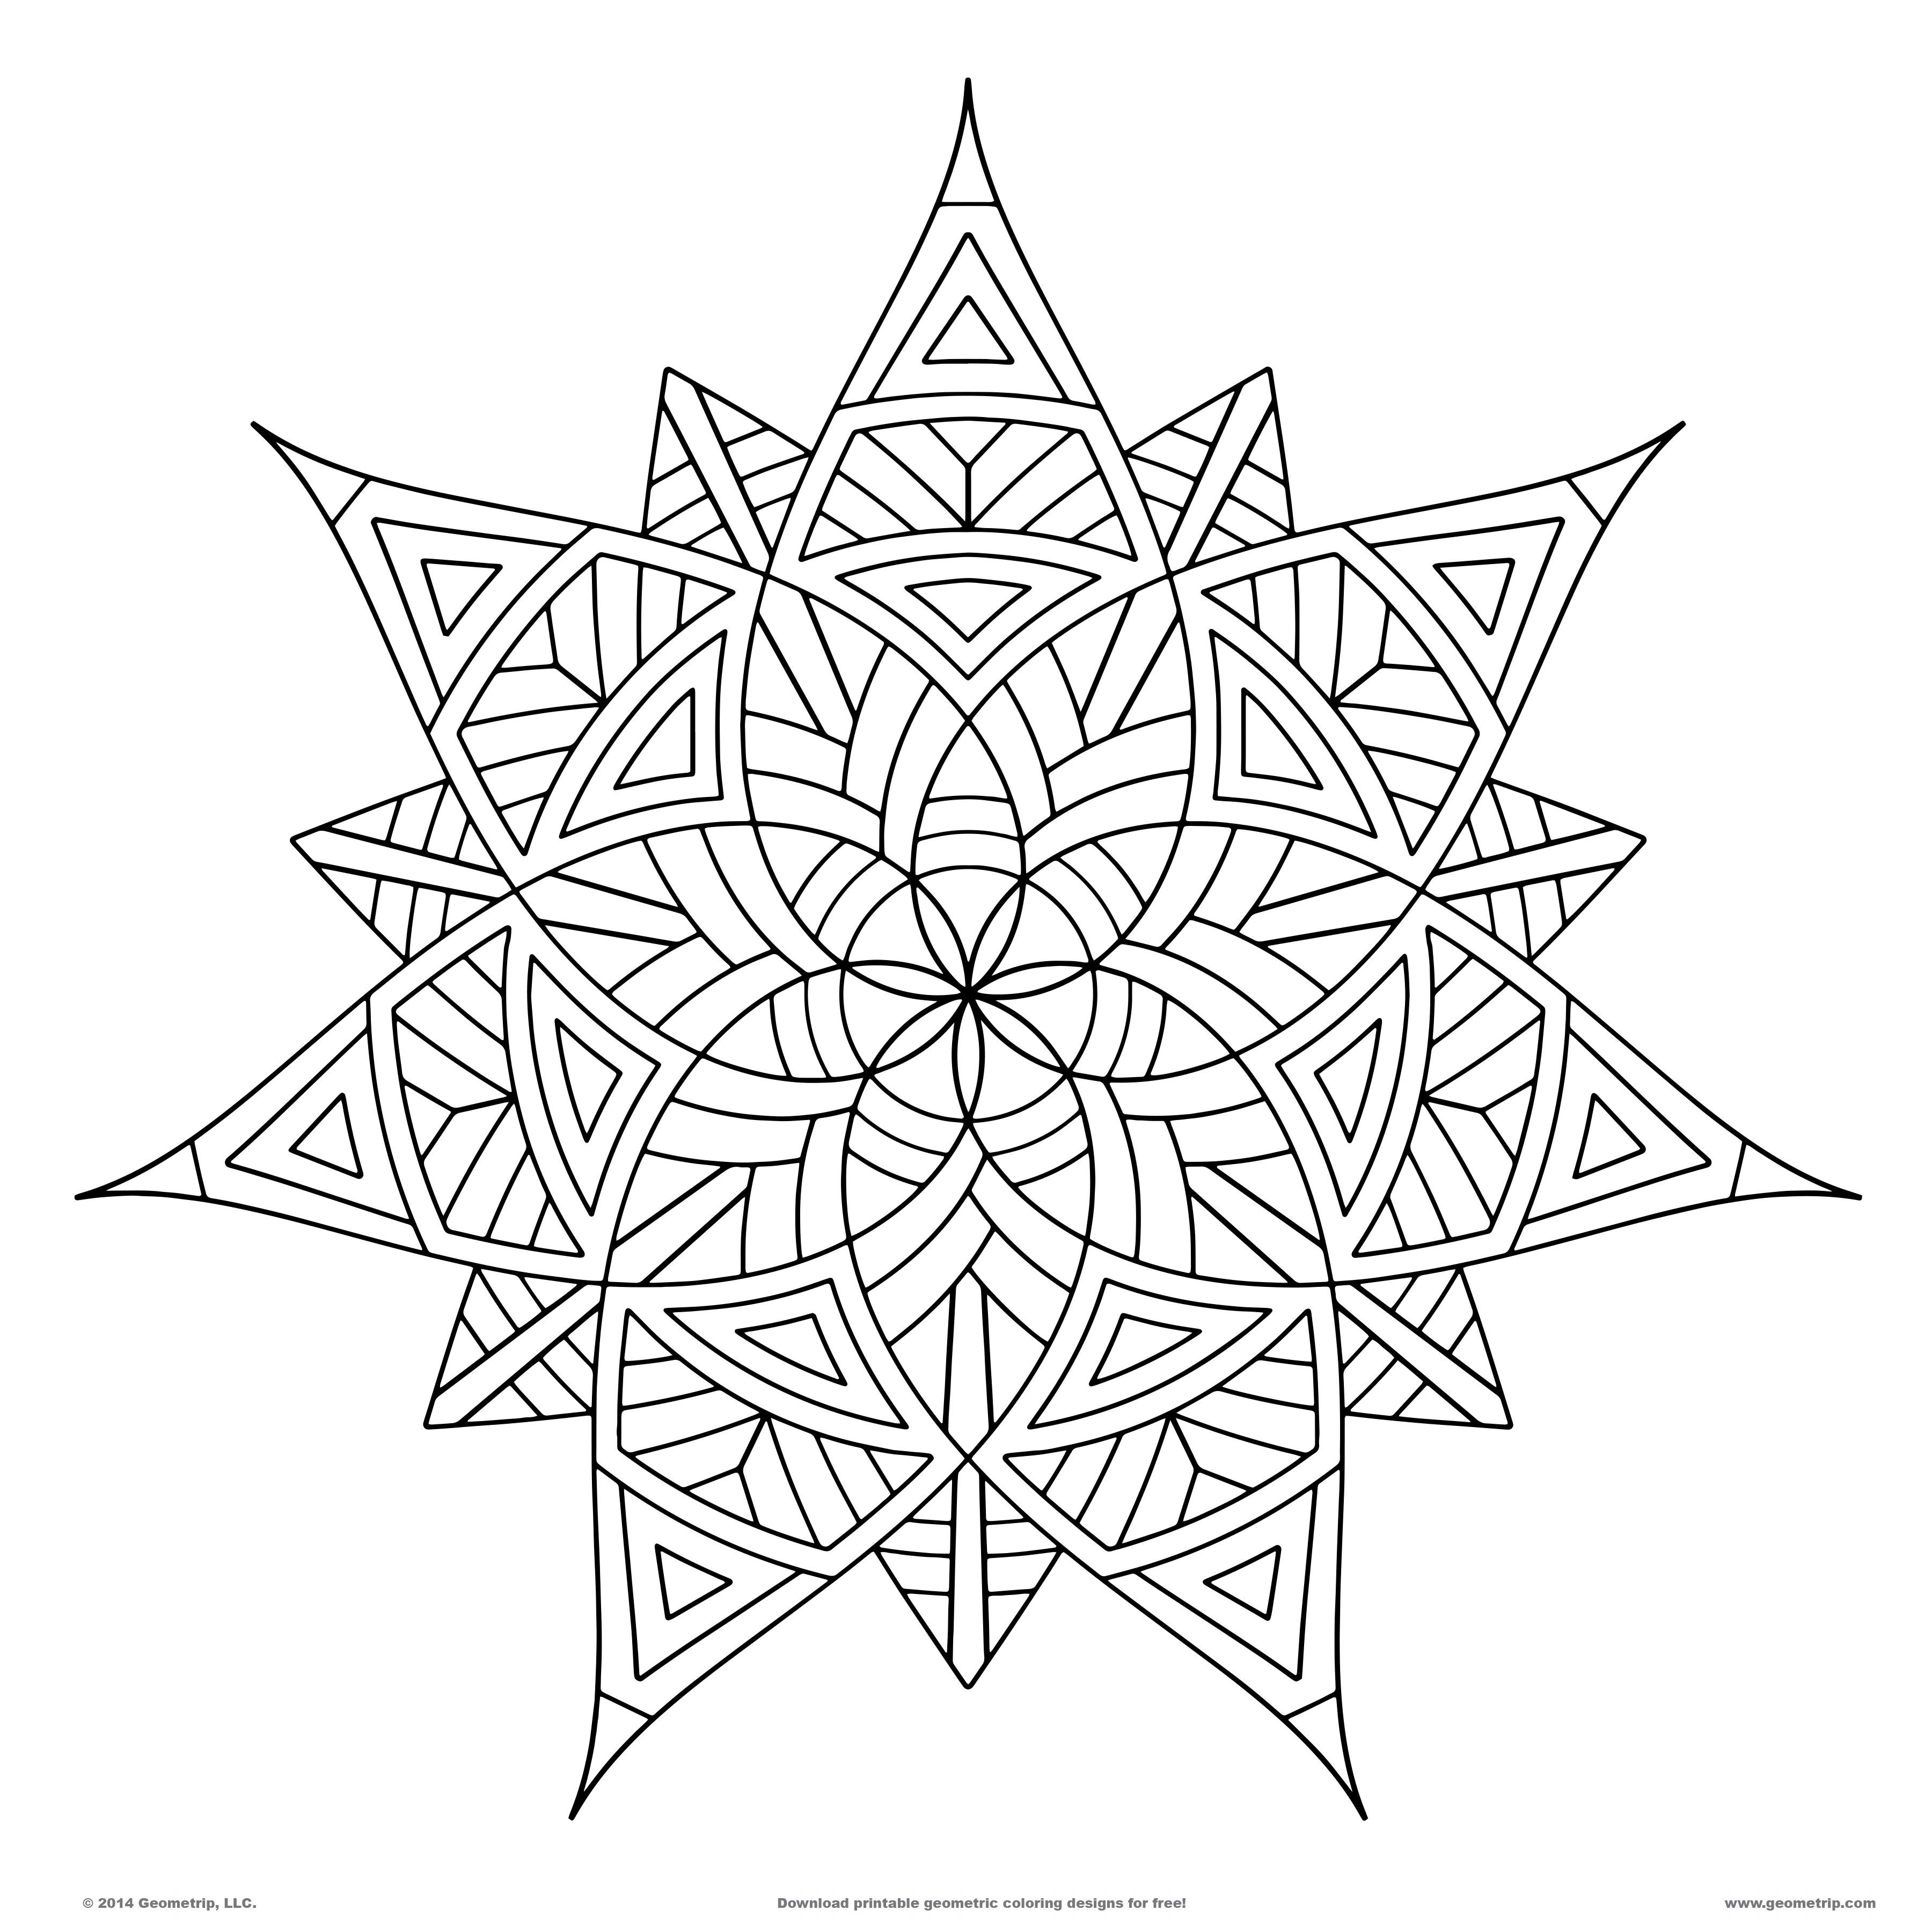 19 Free Pictures for: Free Geometric Coloring Pages. Temoon.us